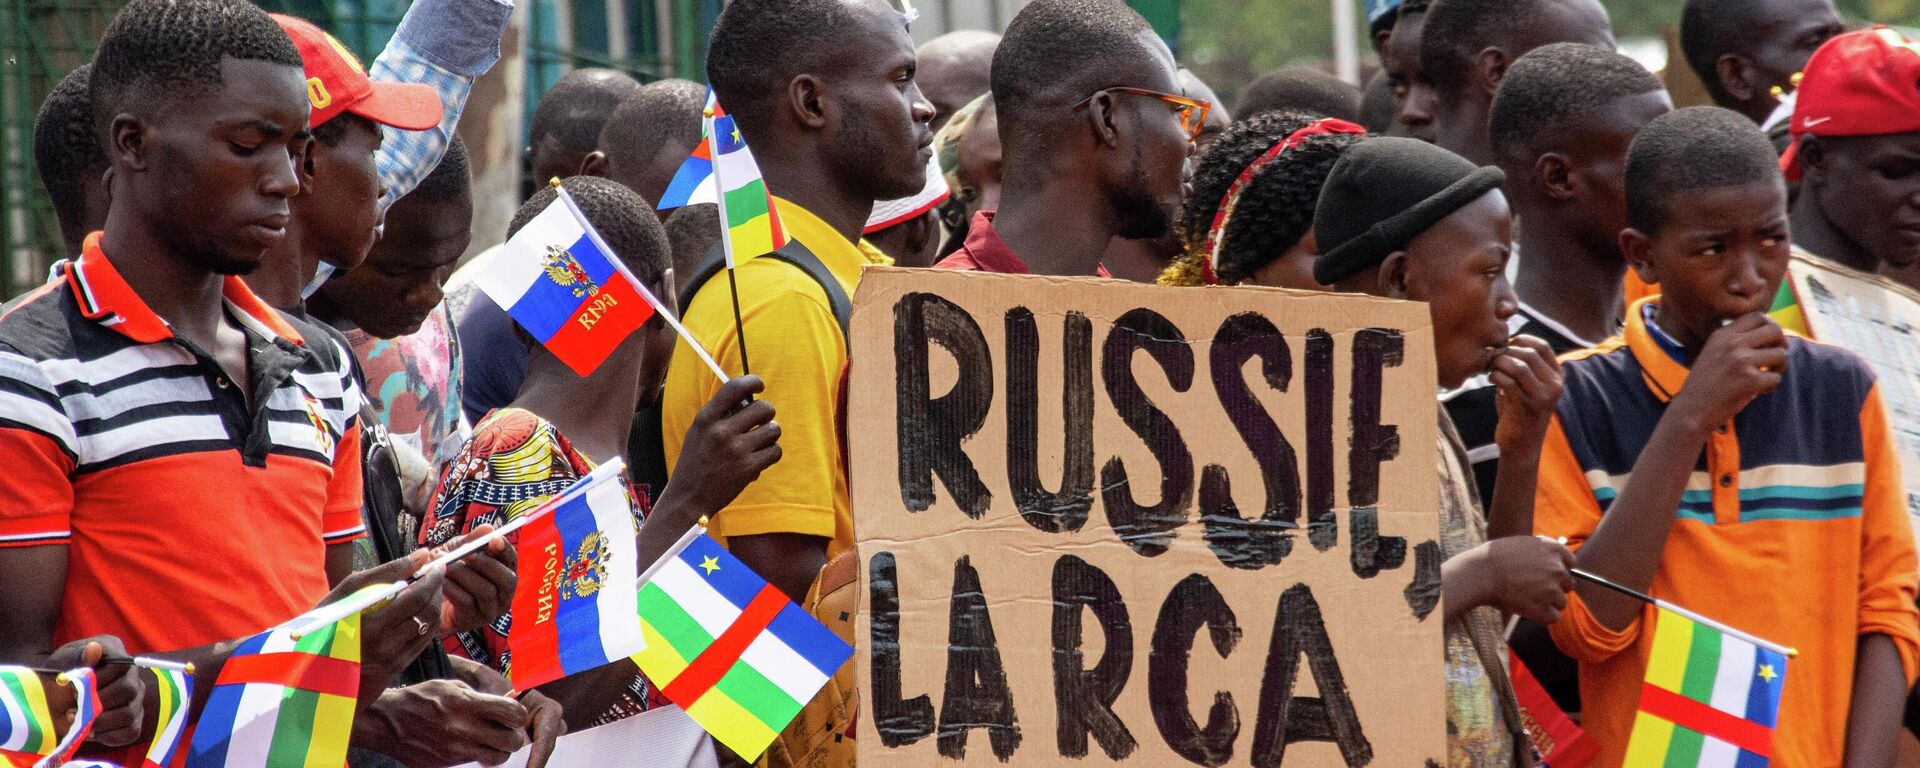 Russian and Central African Republic flags are waived by demonstrators gathered in Bangui on March 5, 2022 during a rally in support of Russia. - Sputnik International, 1920, 15.10.2022